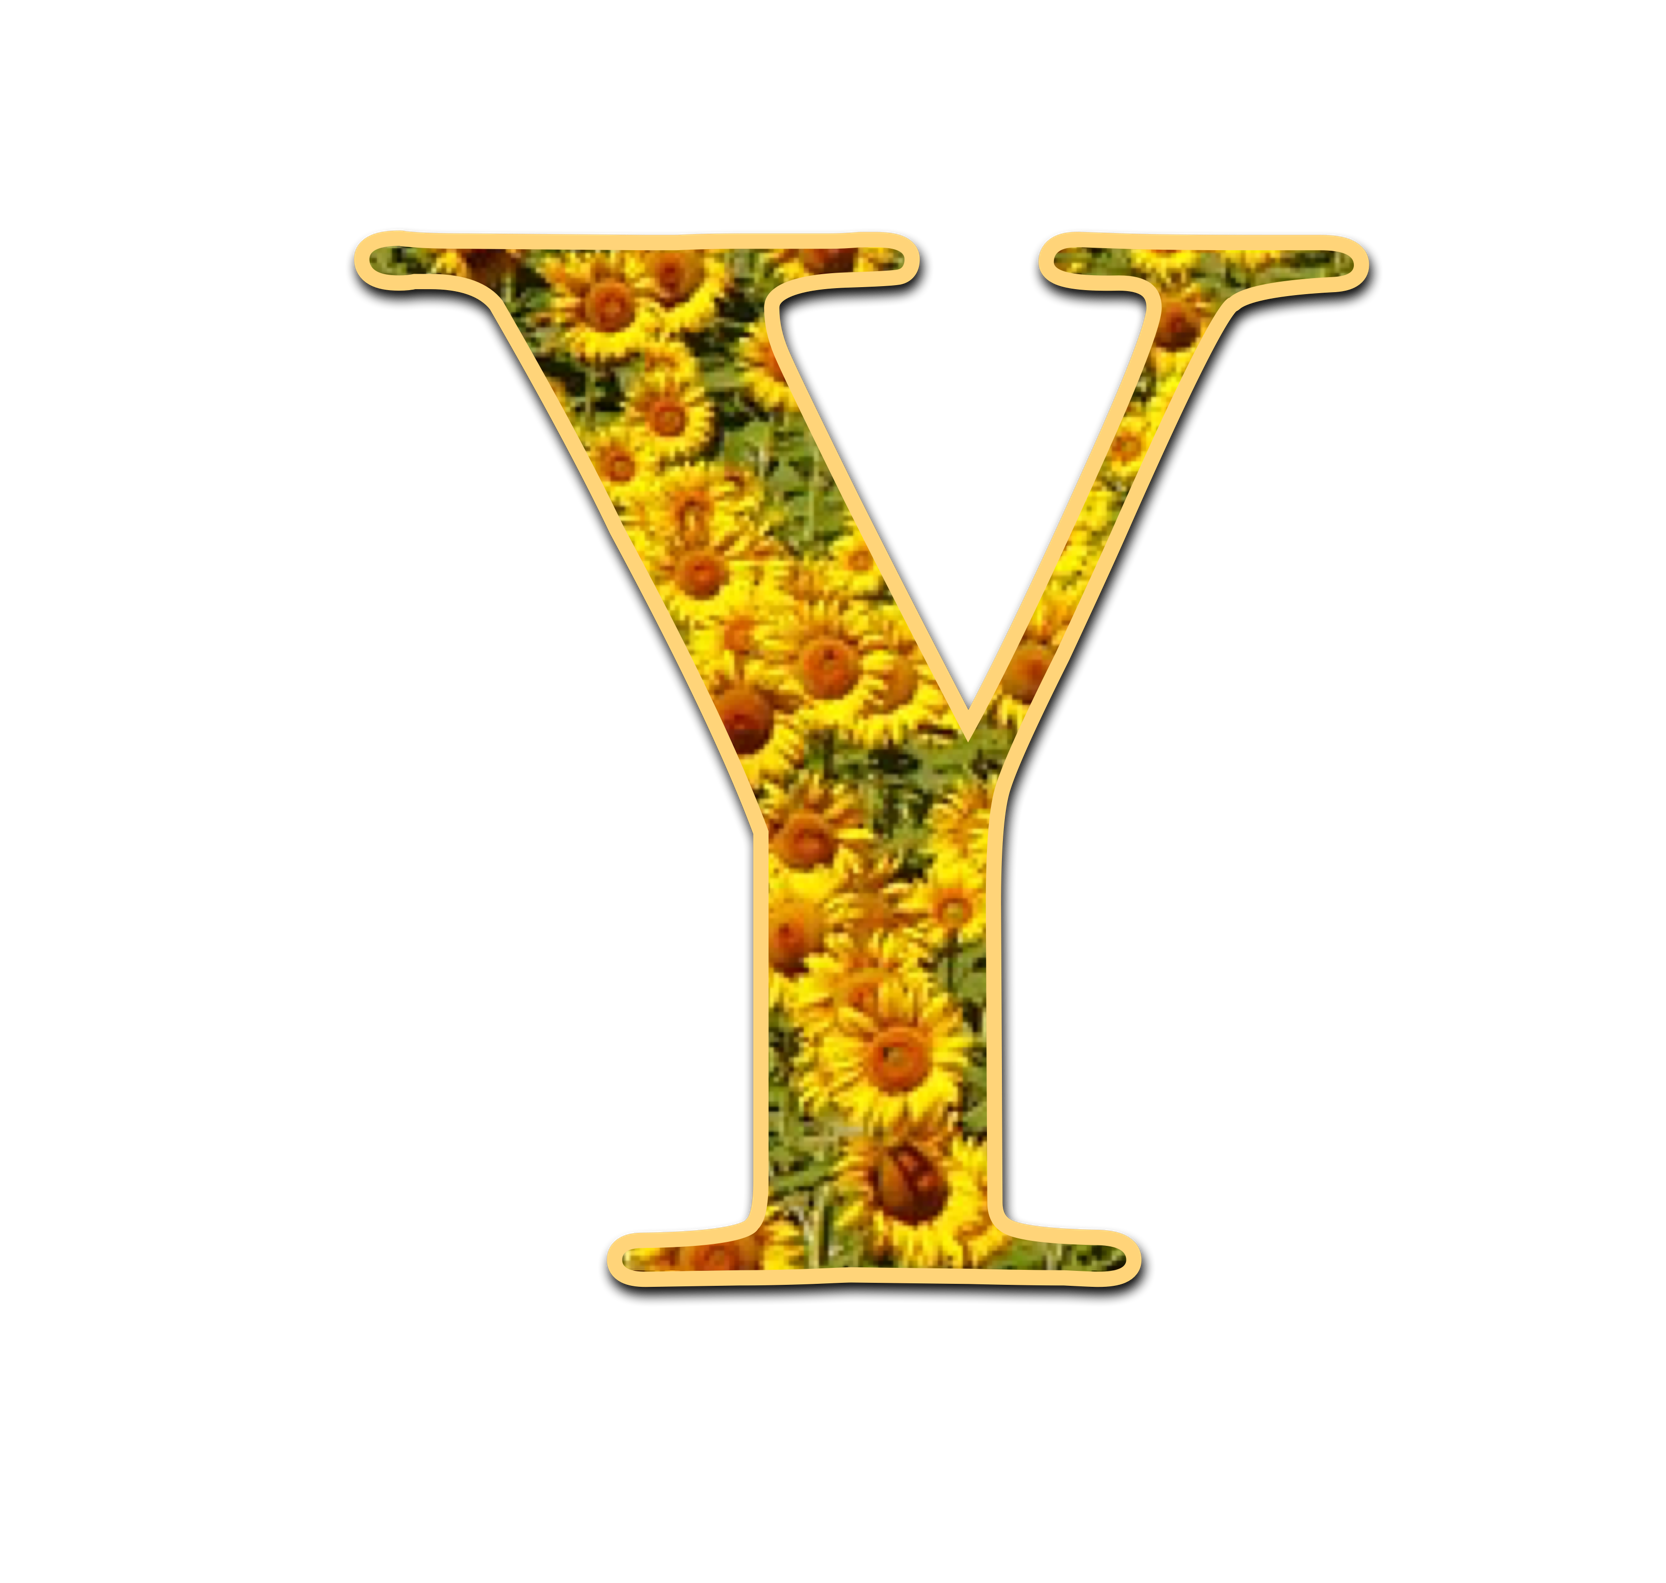 Y made from yellow field flowers